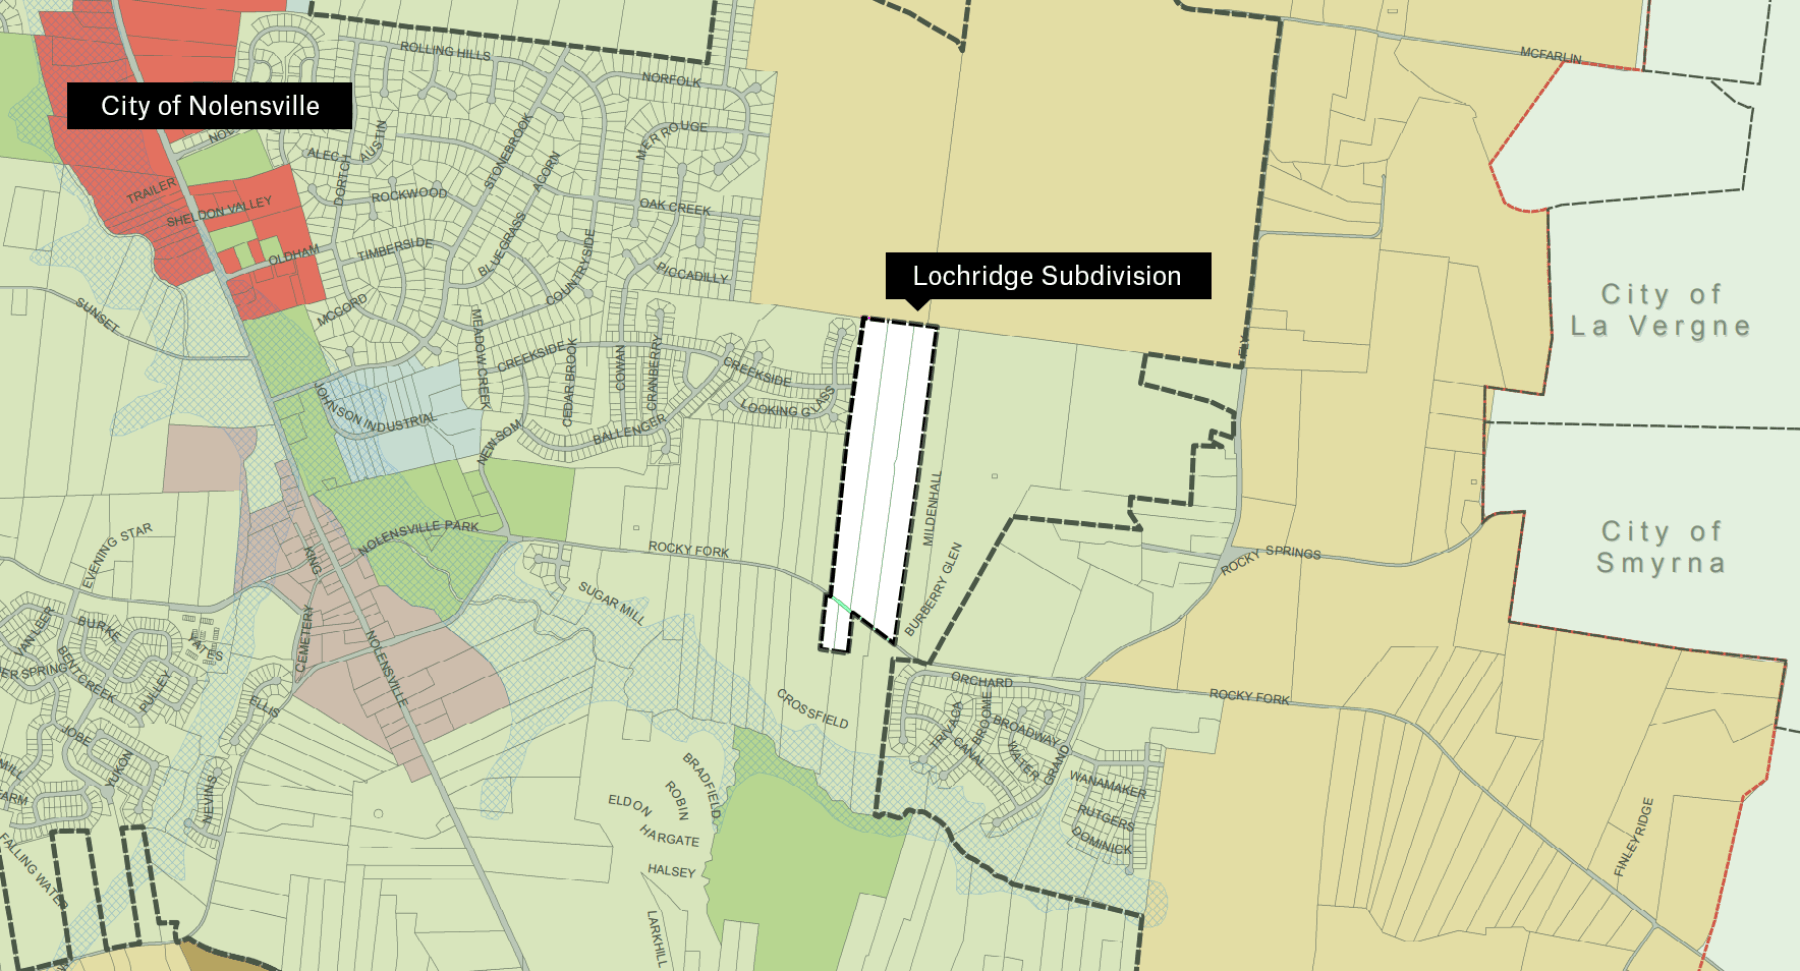 a map showing the zoning of the neighborhood